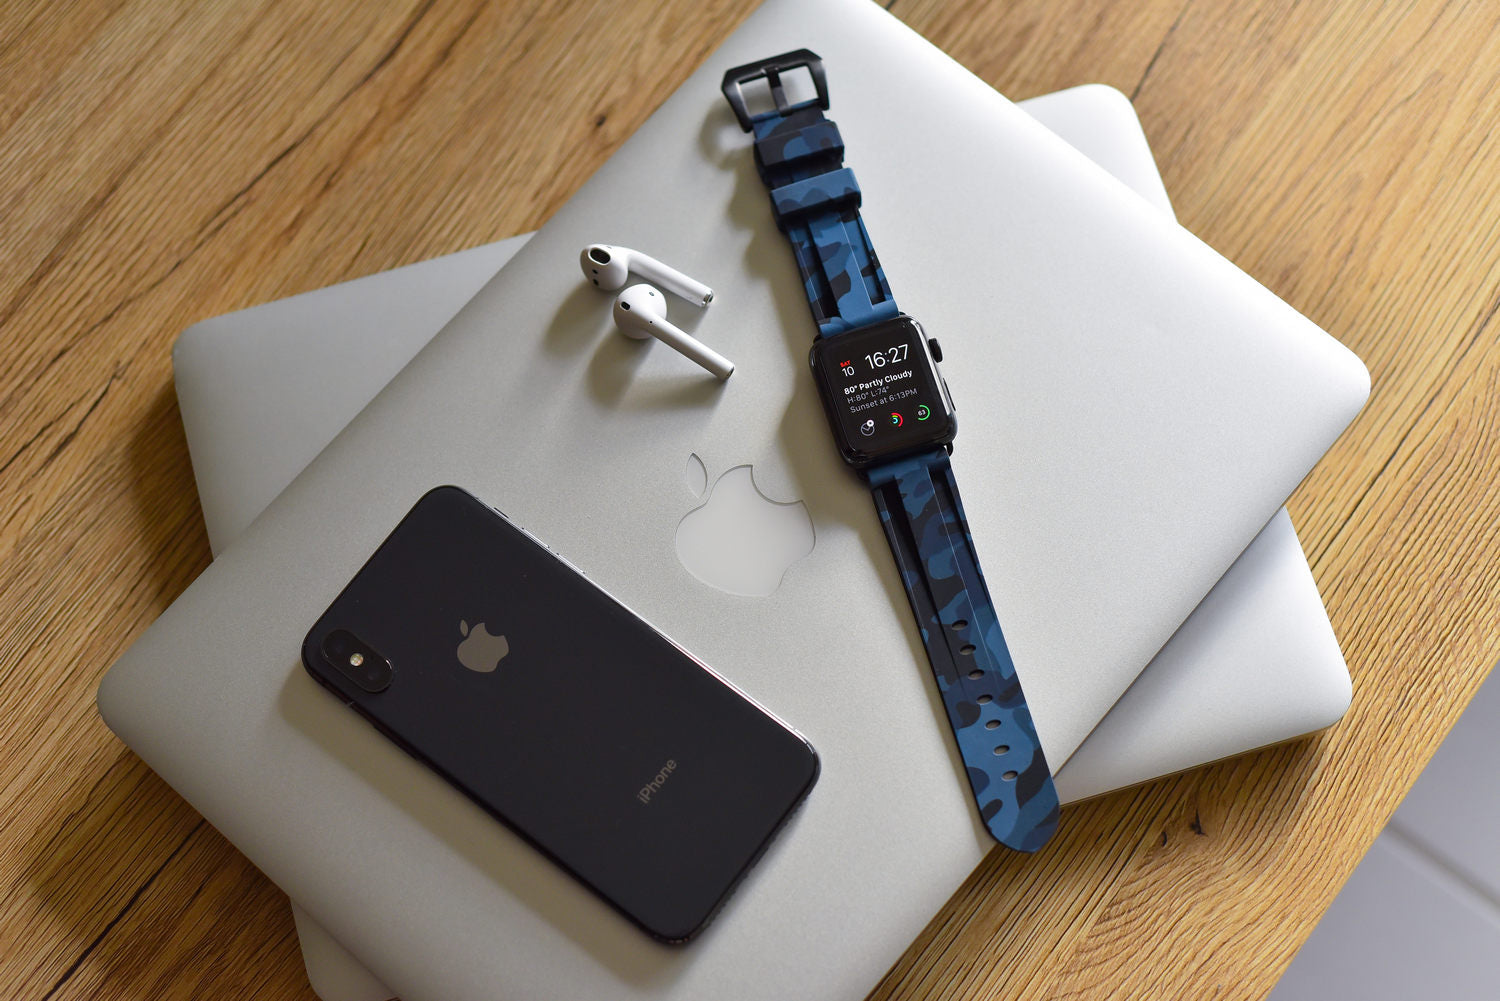 Navy Camo Apple Watch Strap - Apple Watch Strap - Le Luxe Straps